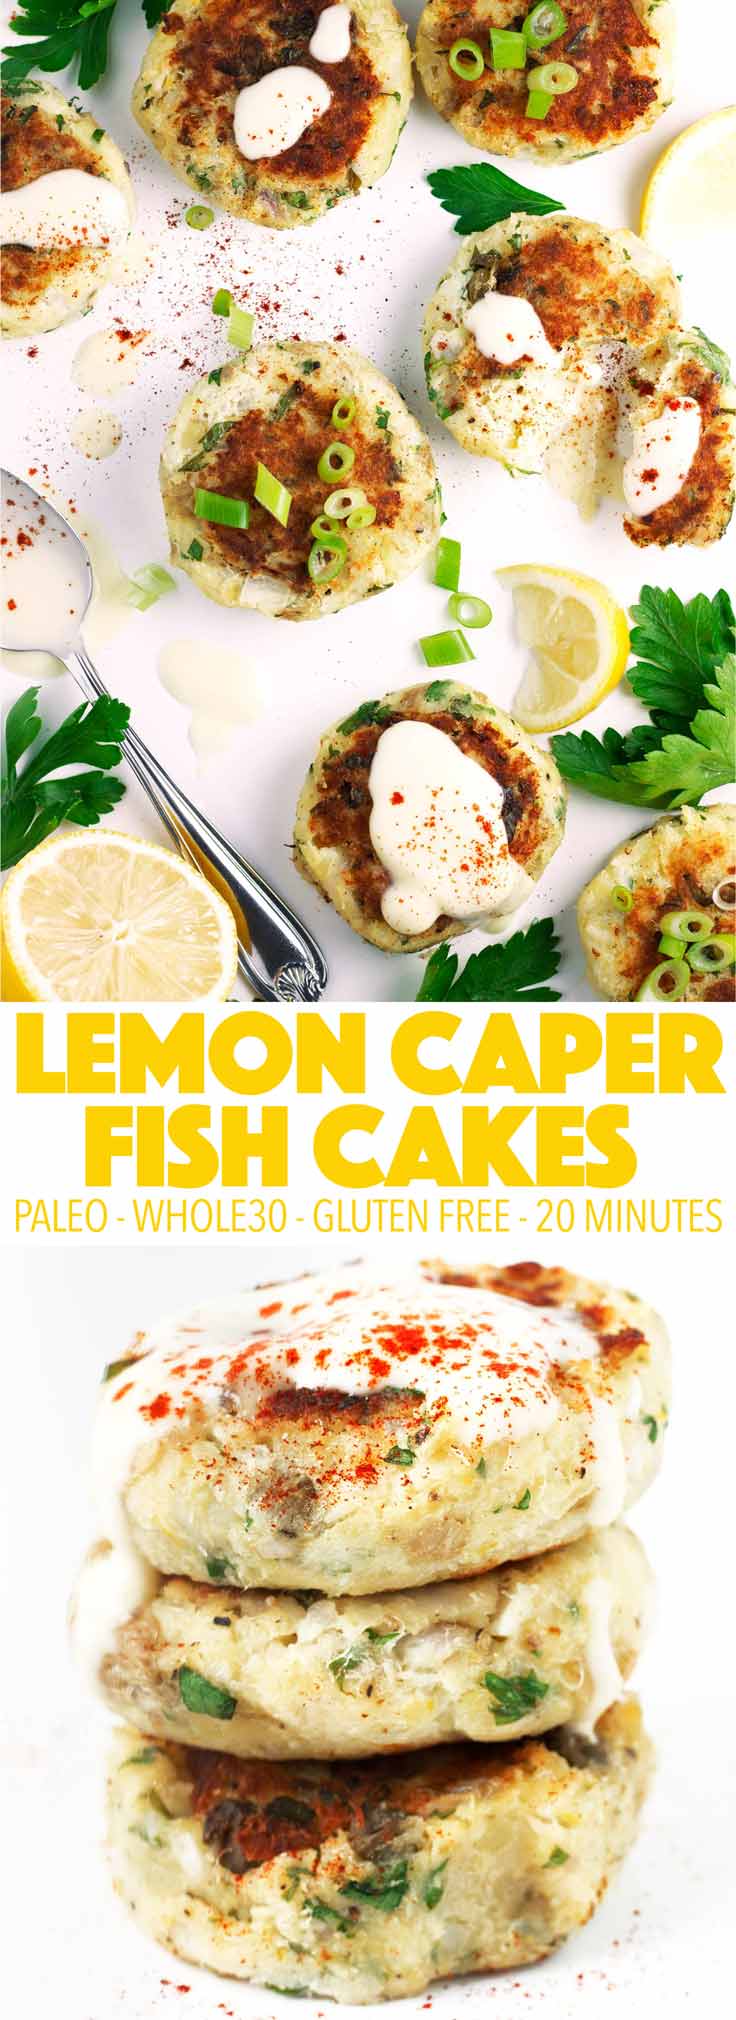 Simple to make and full of flavor! These lemon caper fish cakes are perfect for a weeknight meal or meal prep! They are paleo, Whole30, and gluten free!